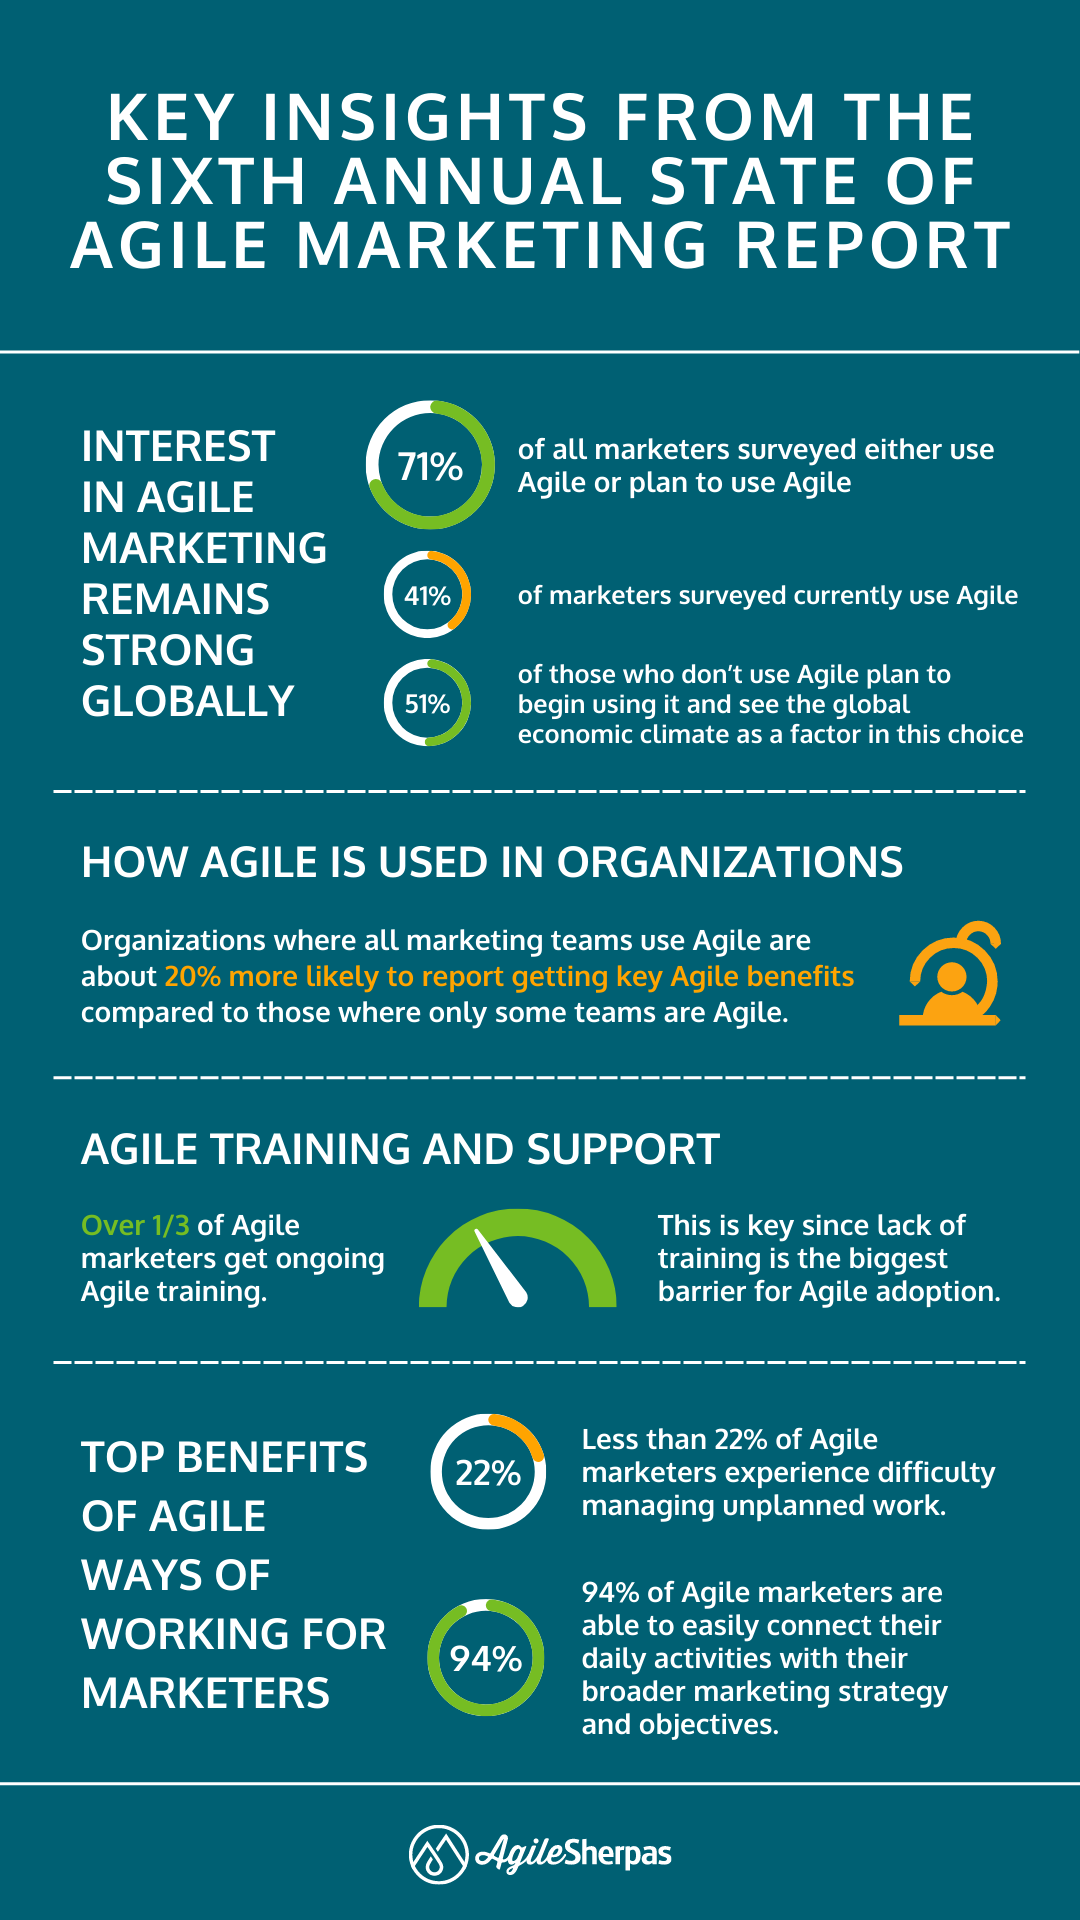 Key Insights of the 6th State of Agile Marketing Report